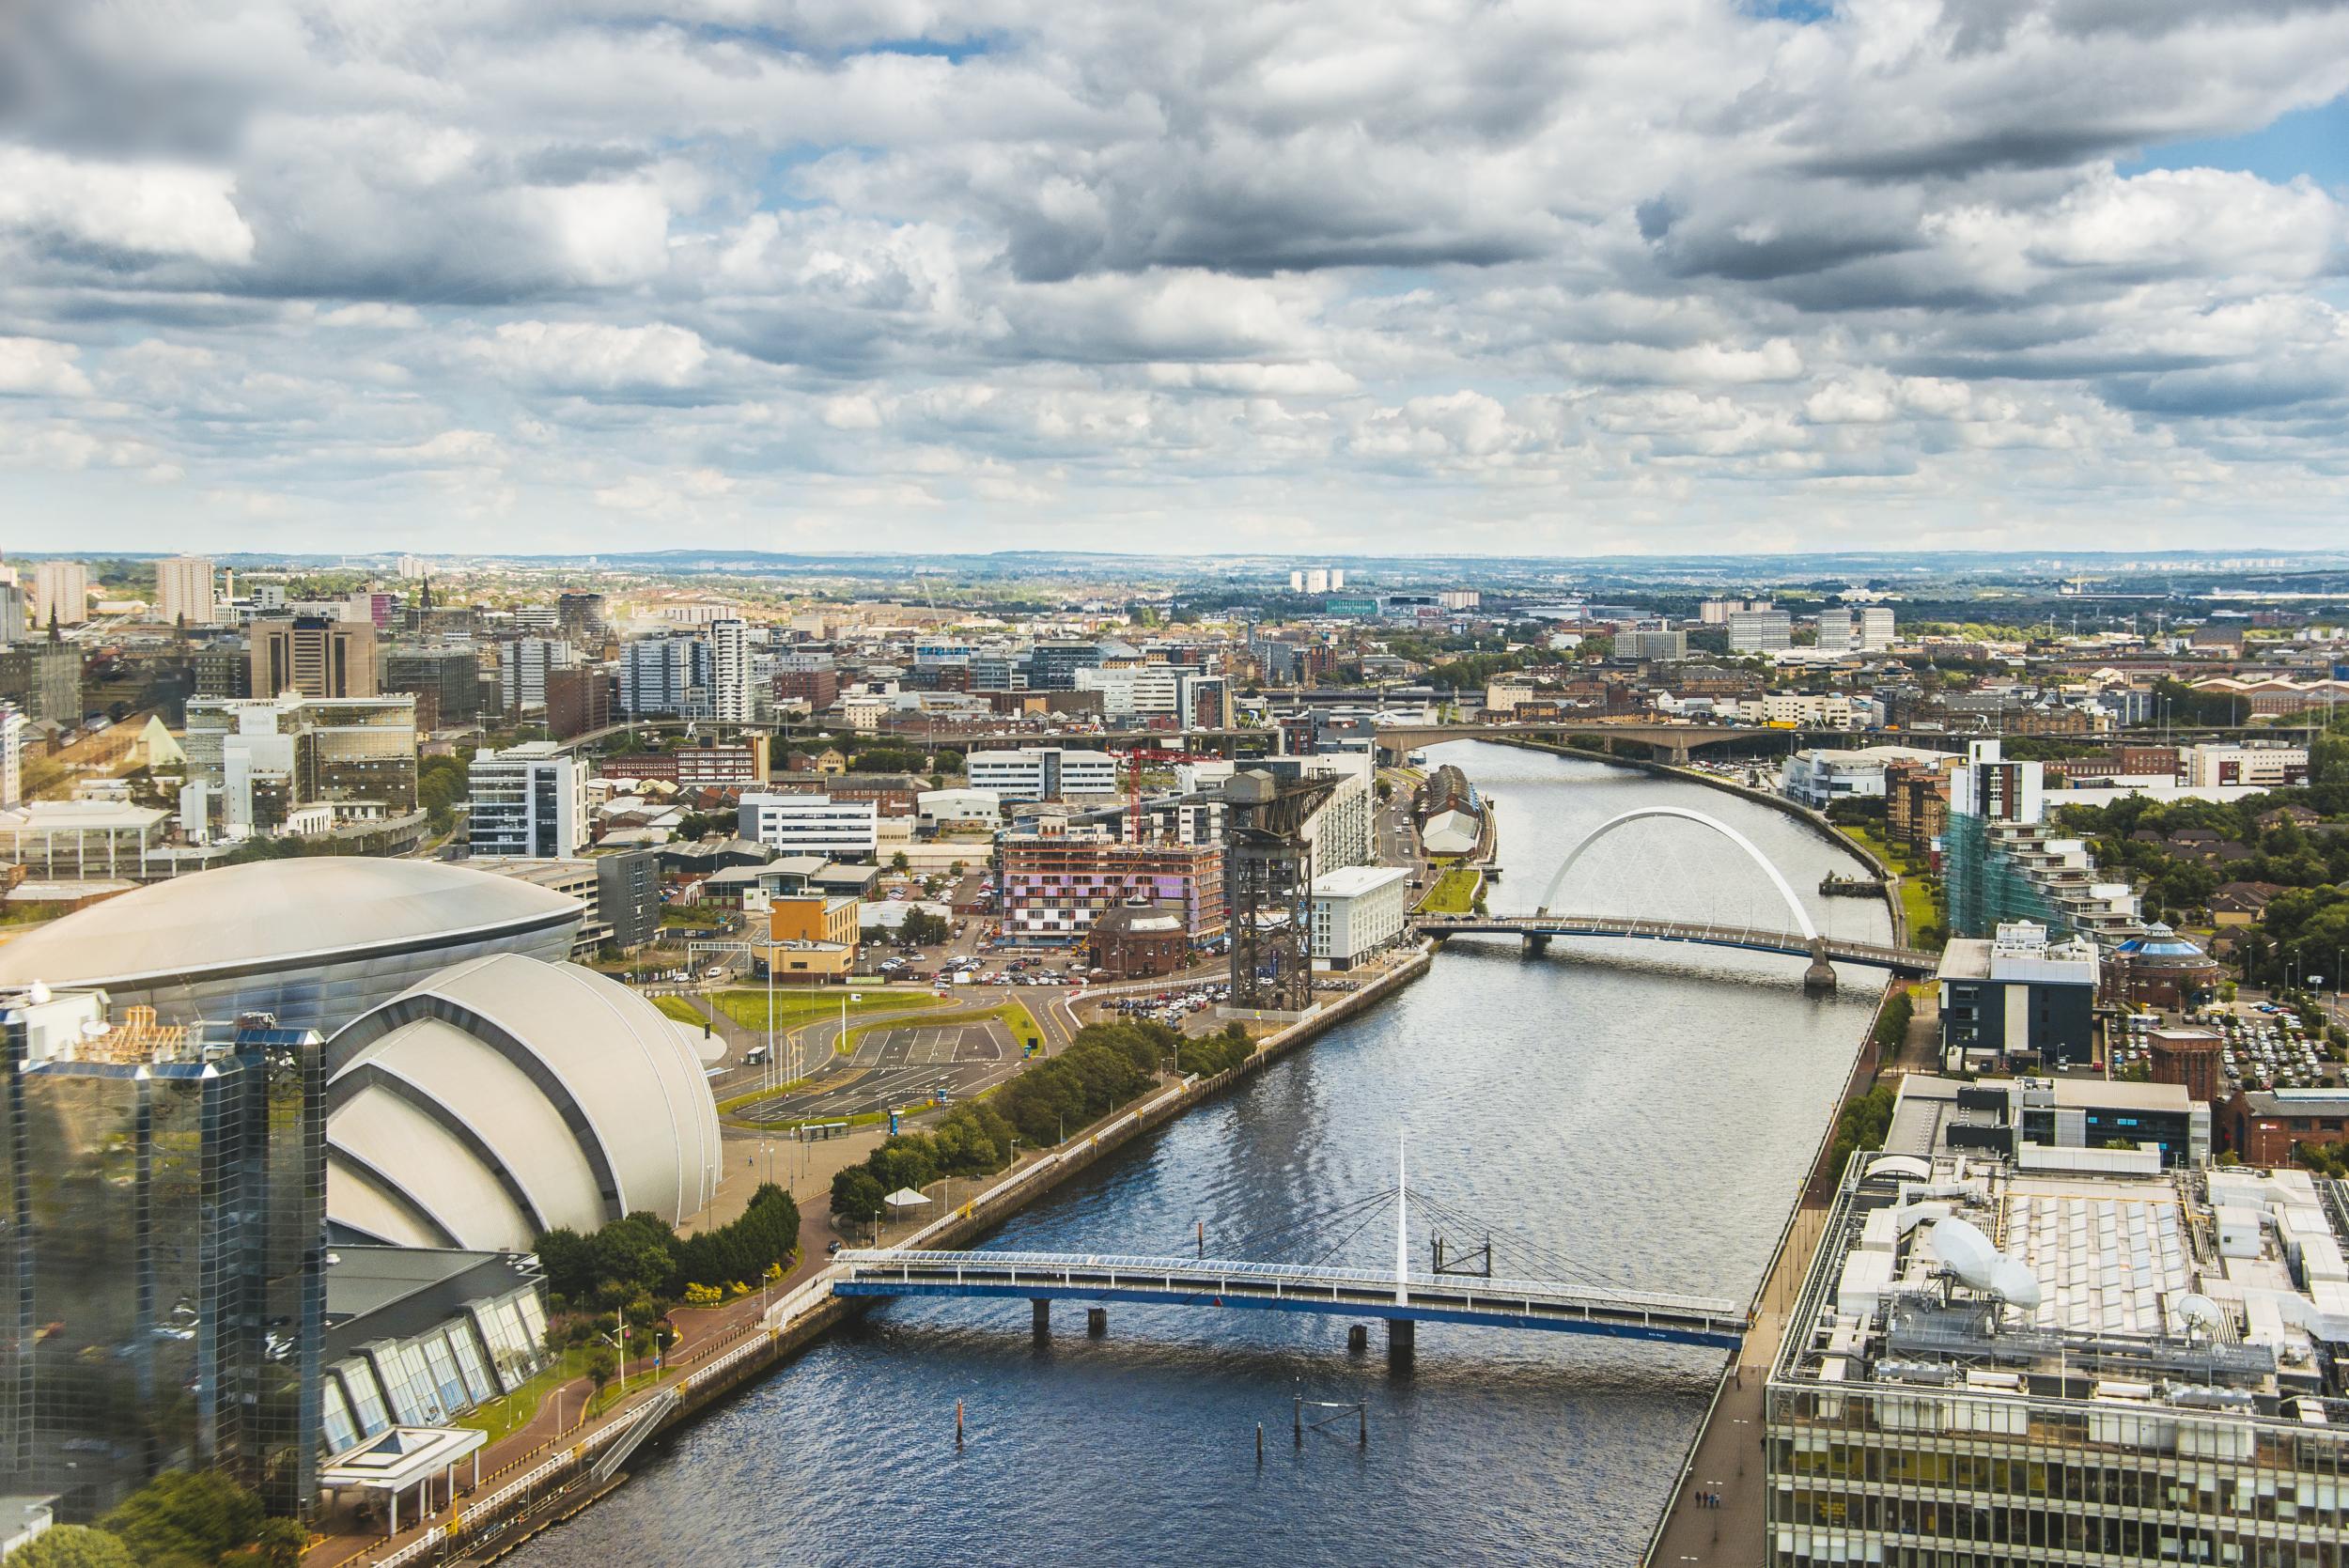 A plethora of entertainment options and cheap housing contributed to Glasgow’s top spot in the ranking